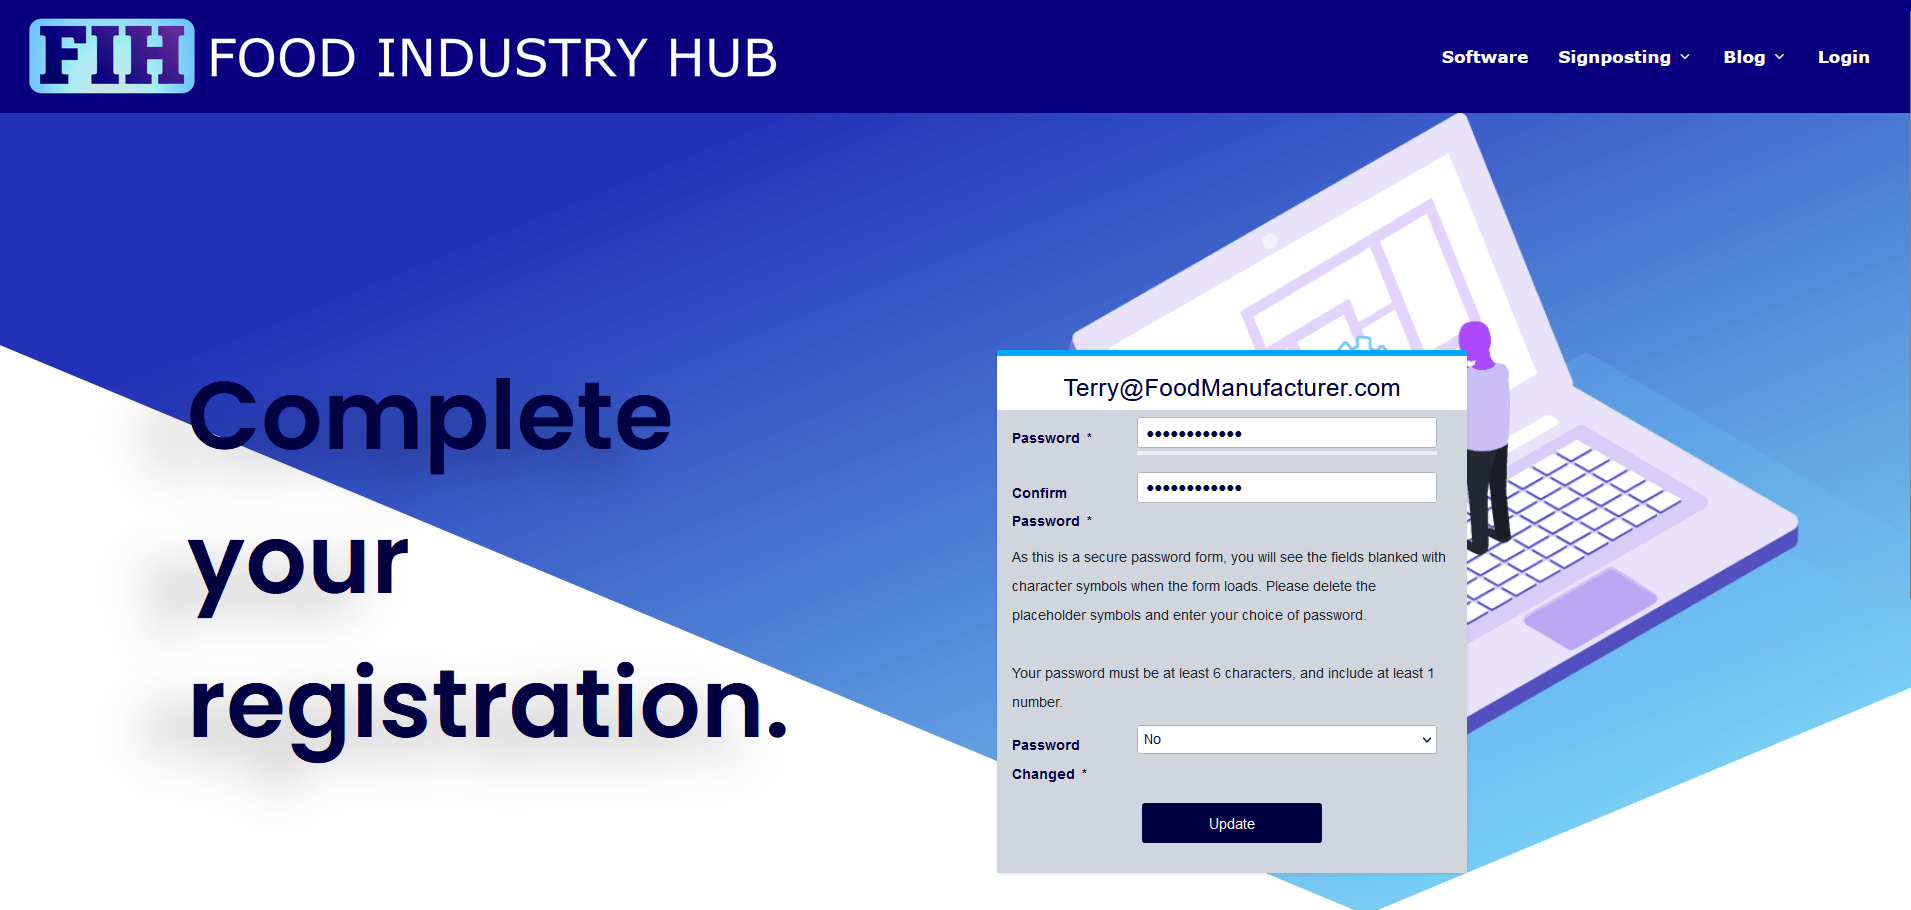 Set your password to complete your registration